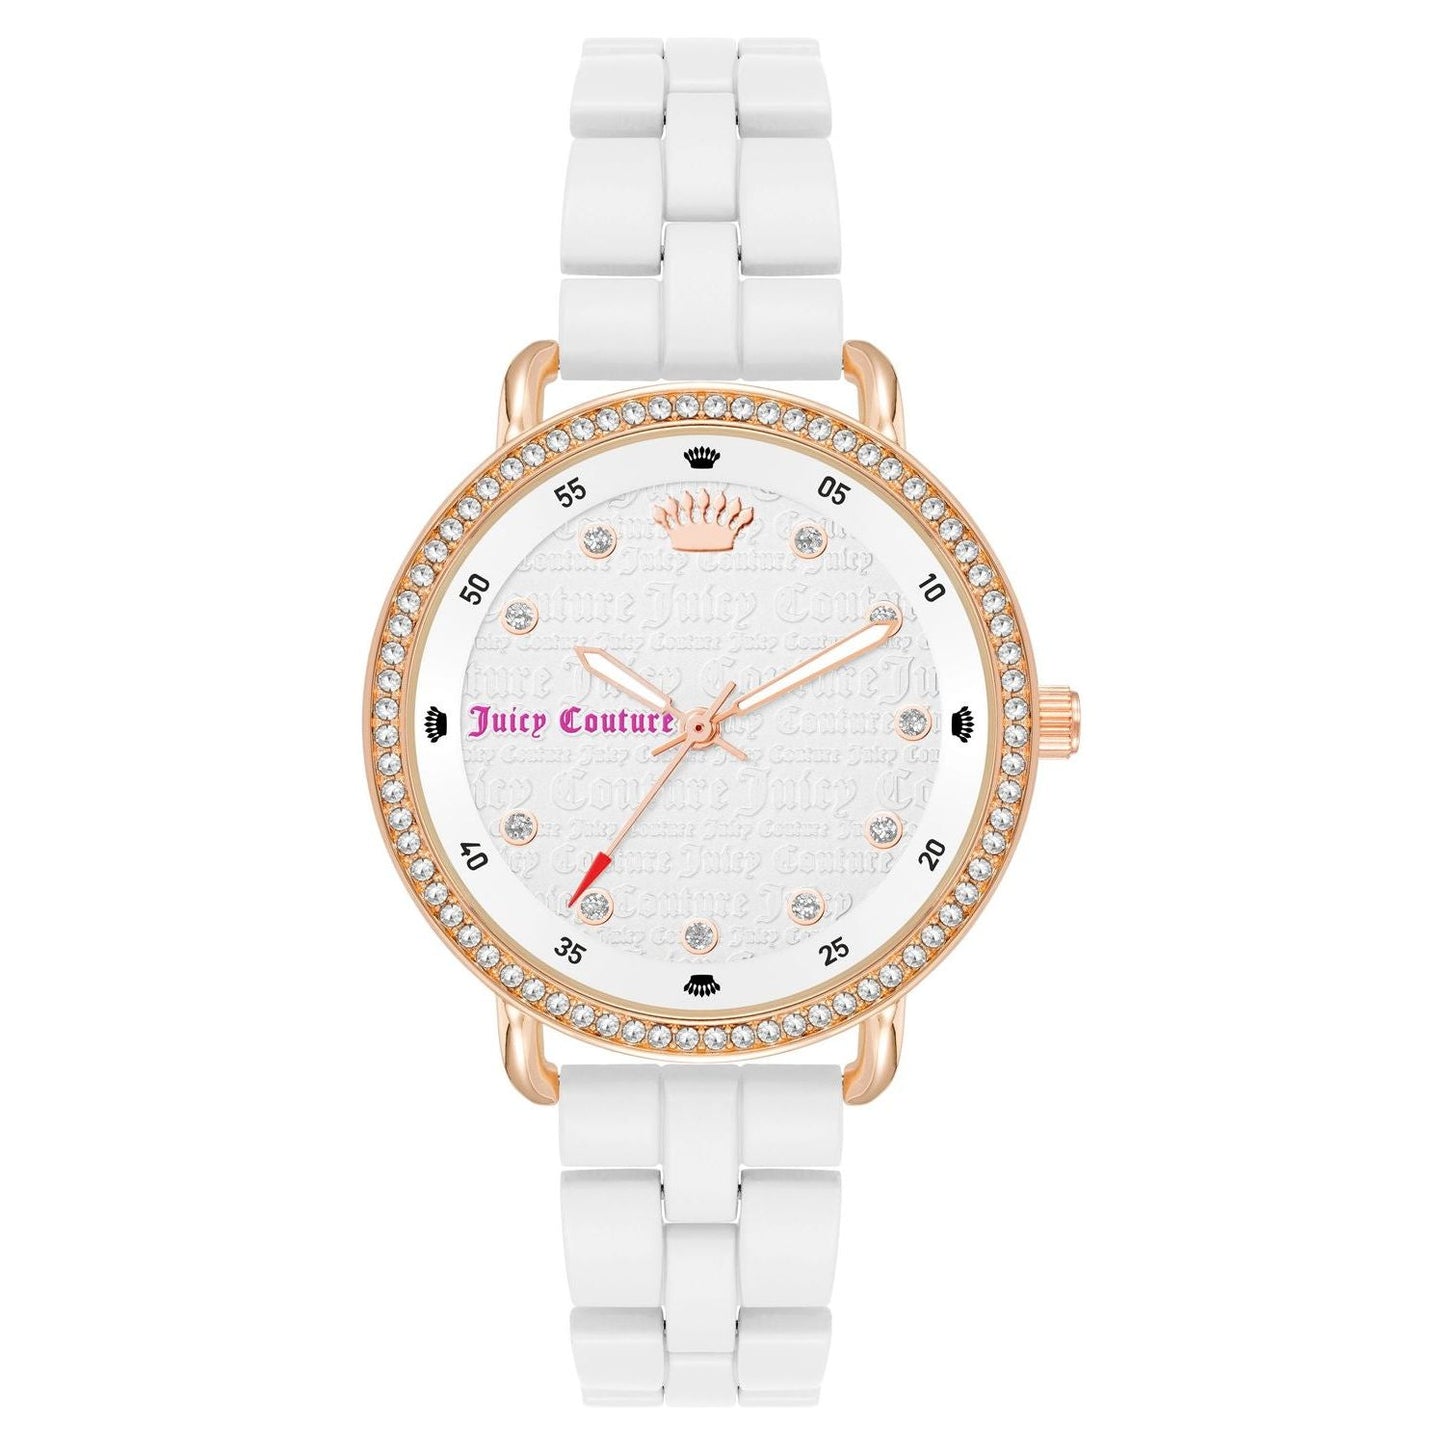 JUICY COUTURE JUICY COUTURE MOD. JC_1310RGWT WATCHES juicy-couture-mod-jc_1310rgwt